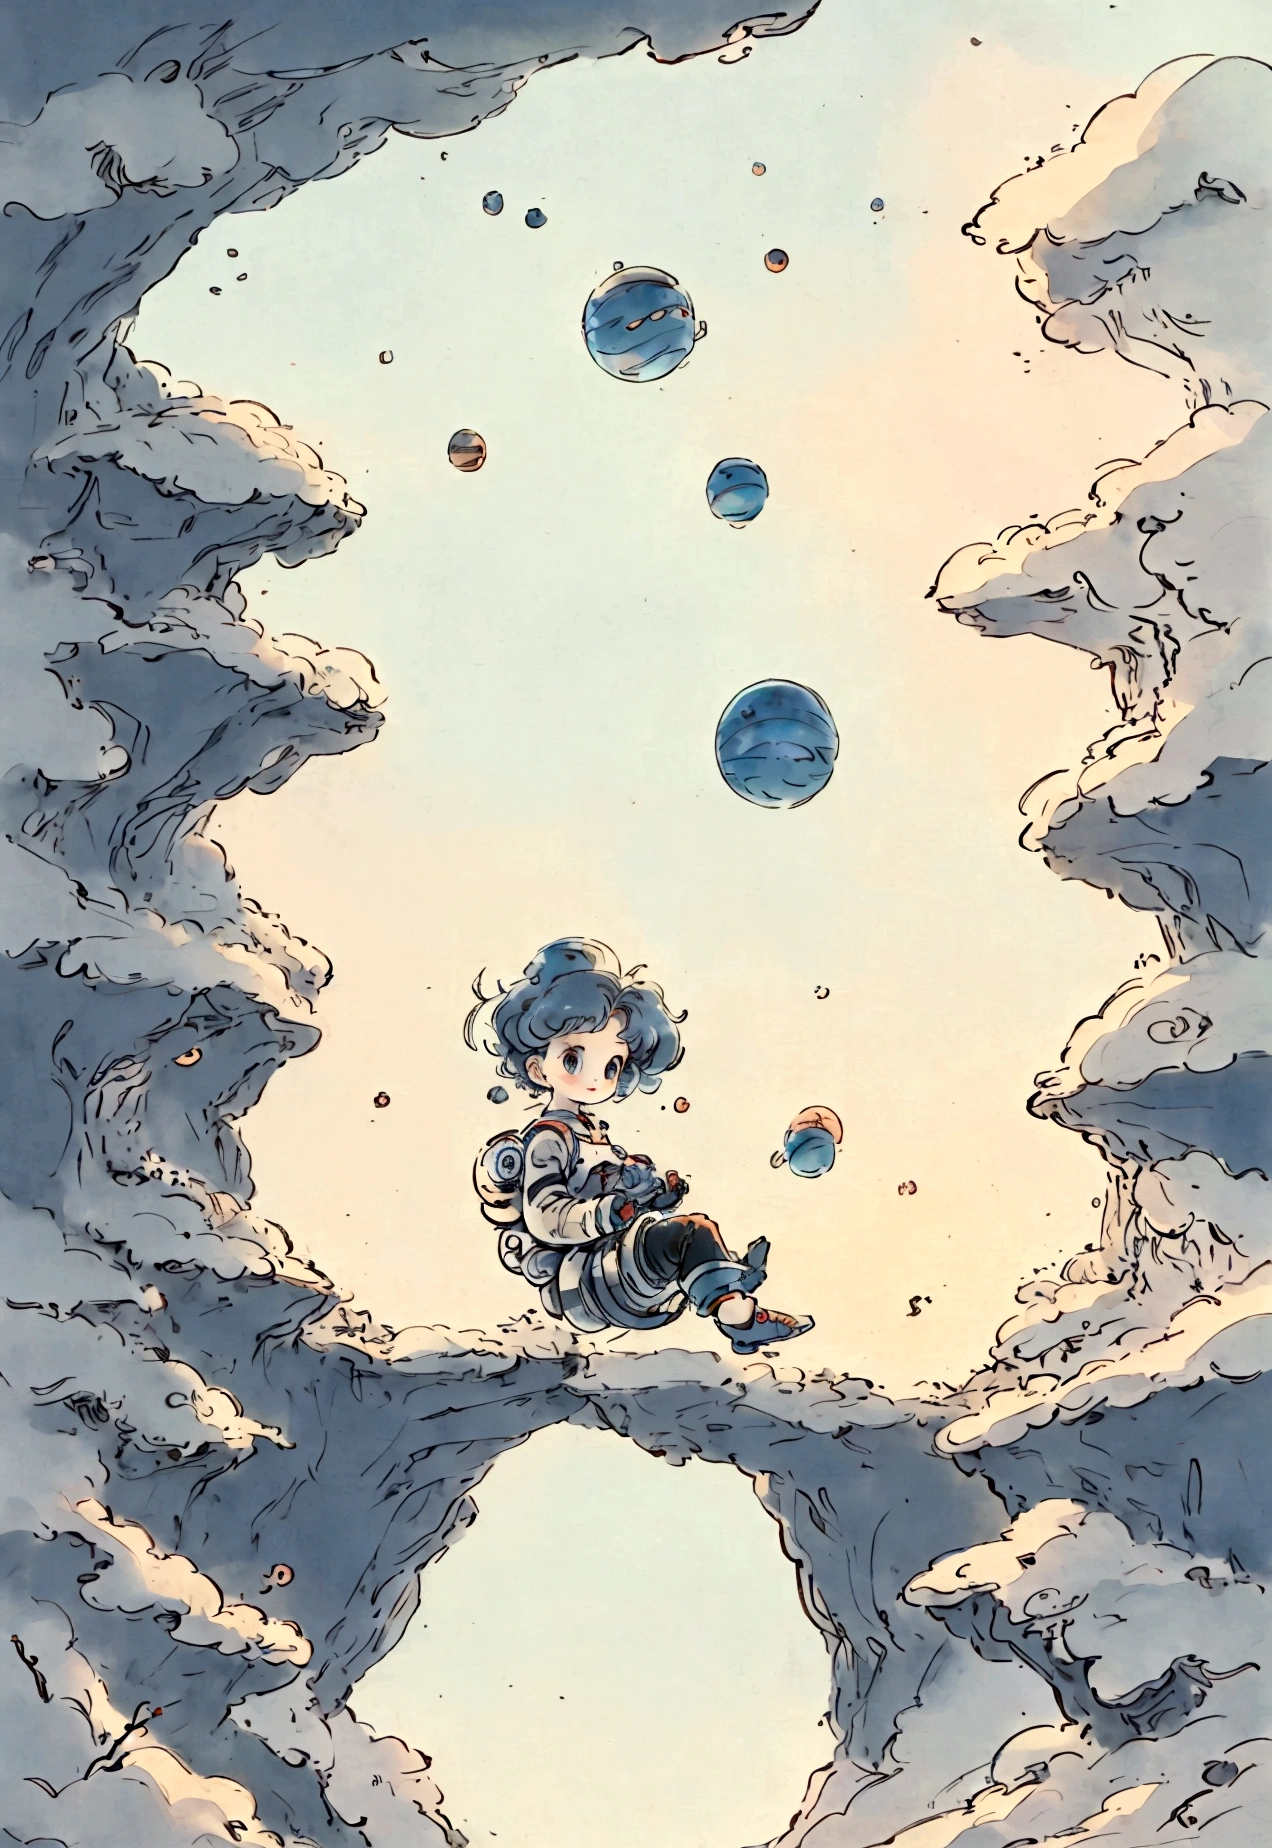 watercolor、Being inside a spaceship、Large windows of spacecraft、performer, Planets and nebulae seen from a spaceship window、girl looking out the window、Mecha、mechanical、Panorama、girl around 24 years old(Baby Face、Slim figure、Looks like a 12 year old boy)Shorts、Ukiyo-e style background、Tiny tubes and pipes undulate like tentacles...、Nipples are visible without a bra、Spacesuit